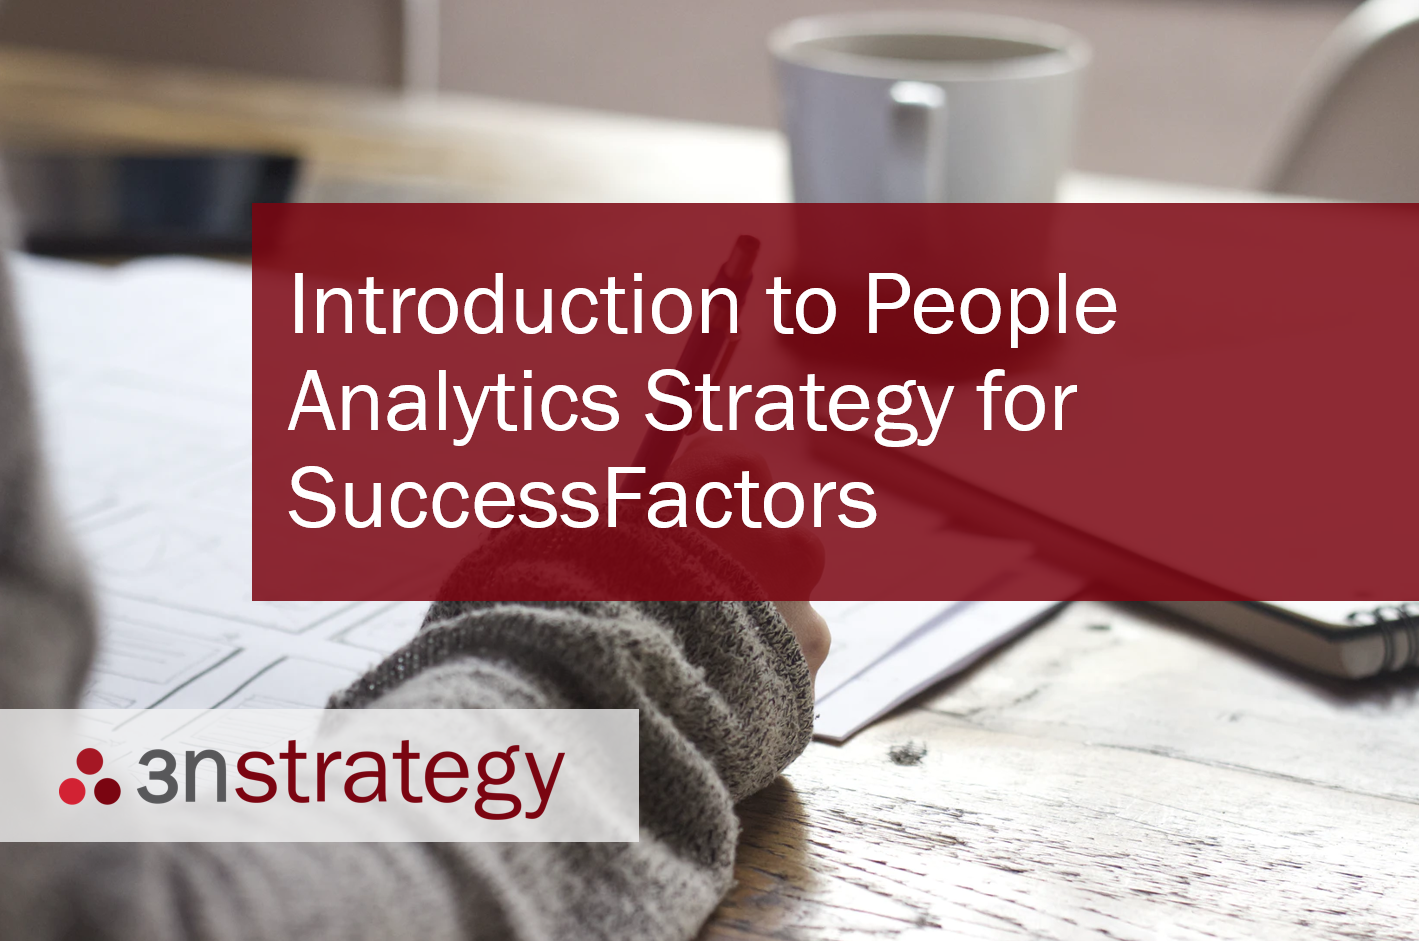 Introduction to People Analytics Strategy for SuccessFactors